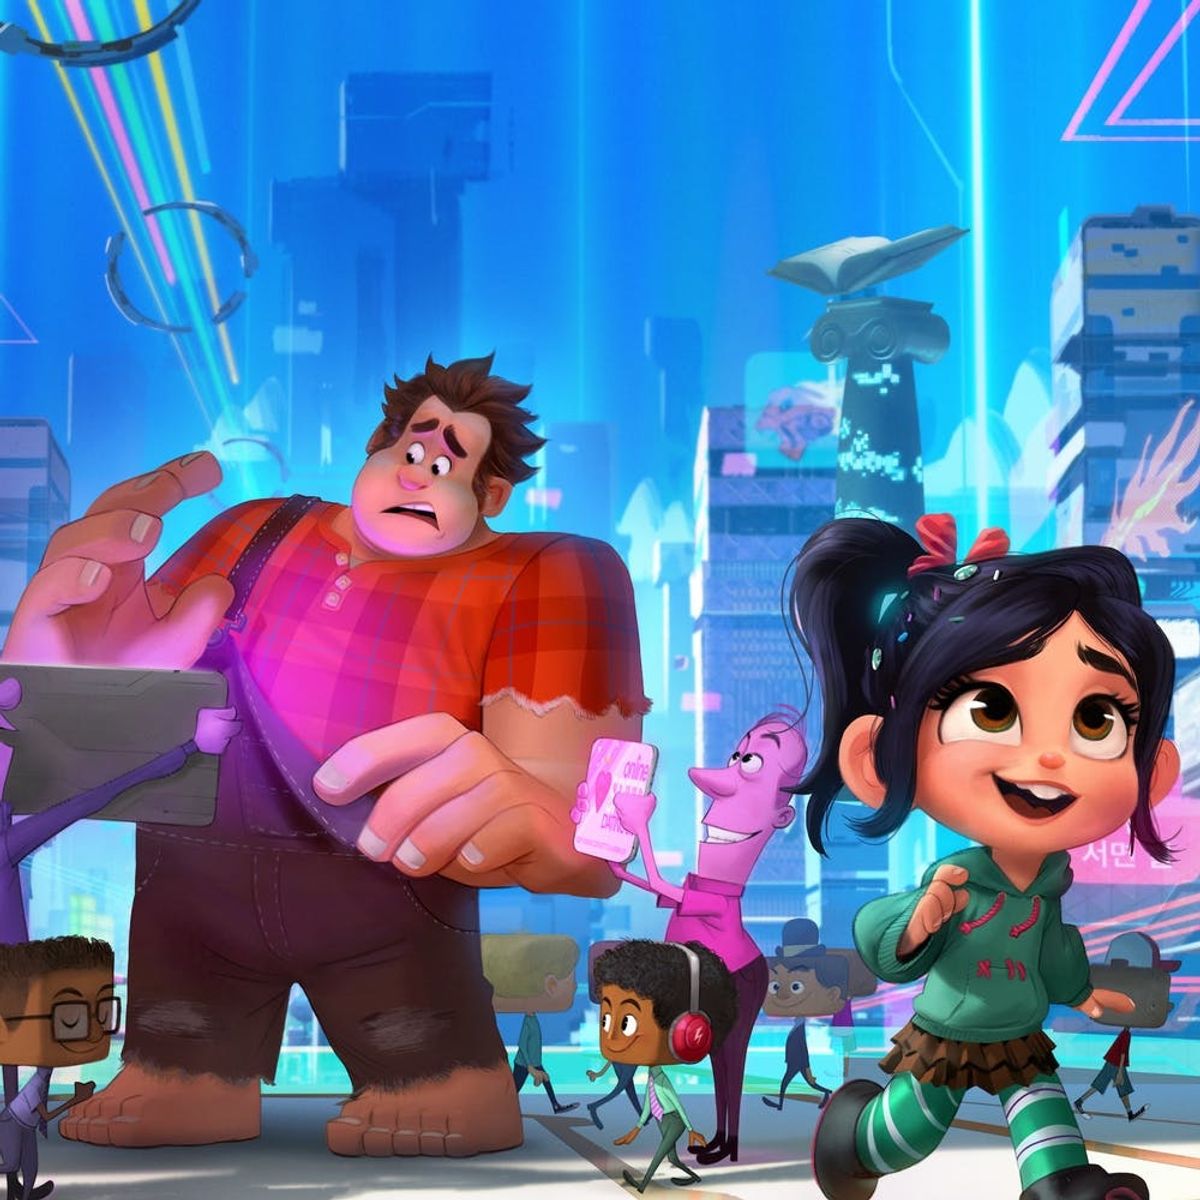 The First Full Trailer for ‘Wreck-It Ralph 2’ May Break the Internet (In Its Own Way)